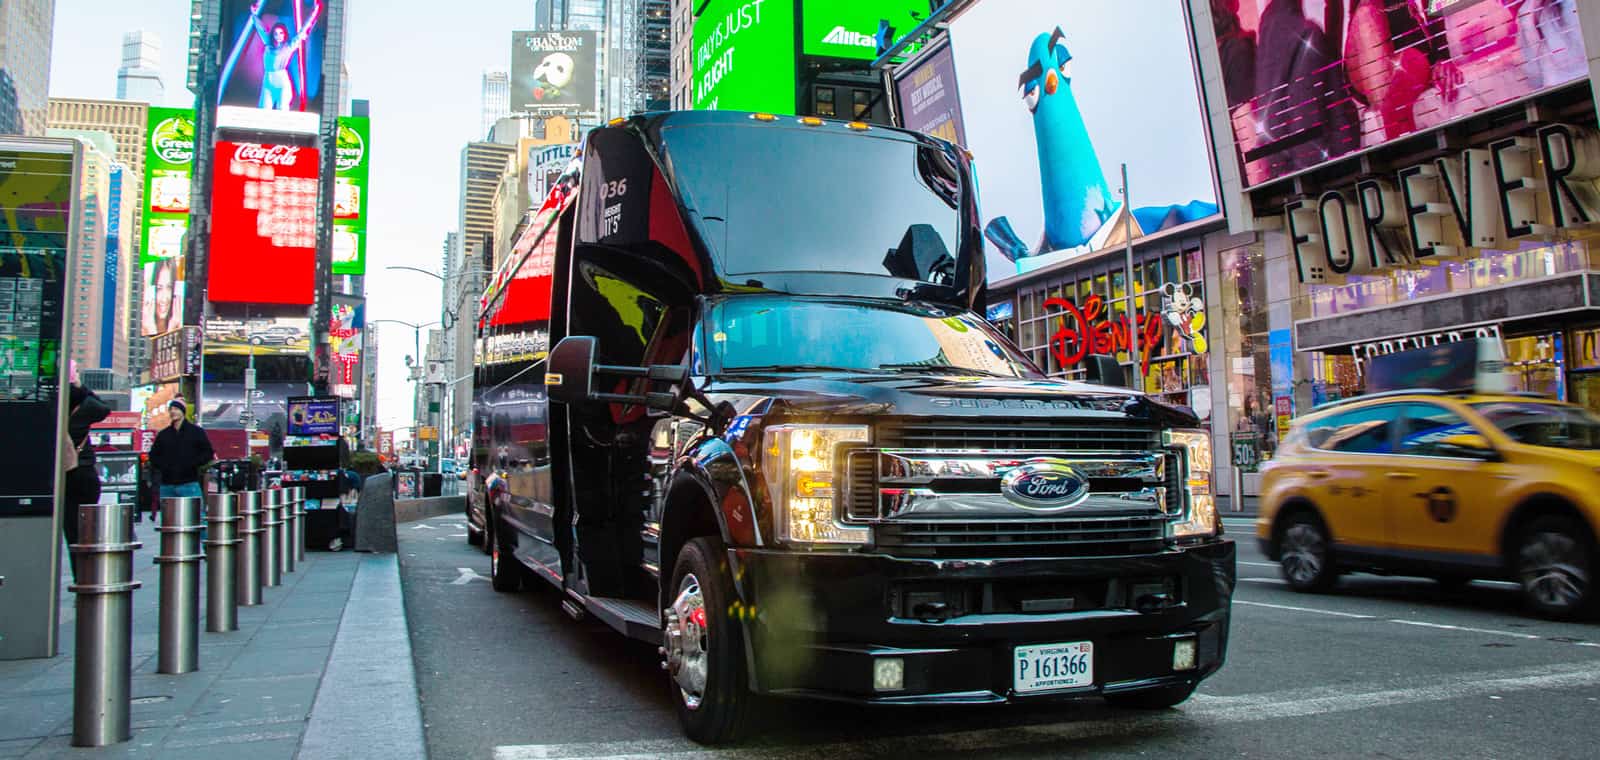 NYC BUS TOURS BY USA GUIDED TOURS